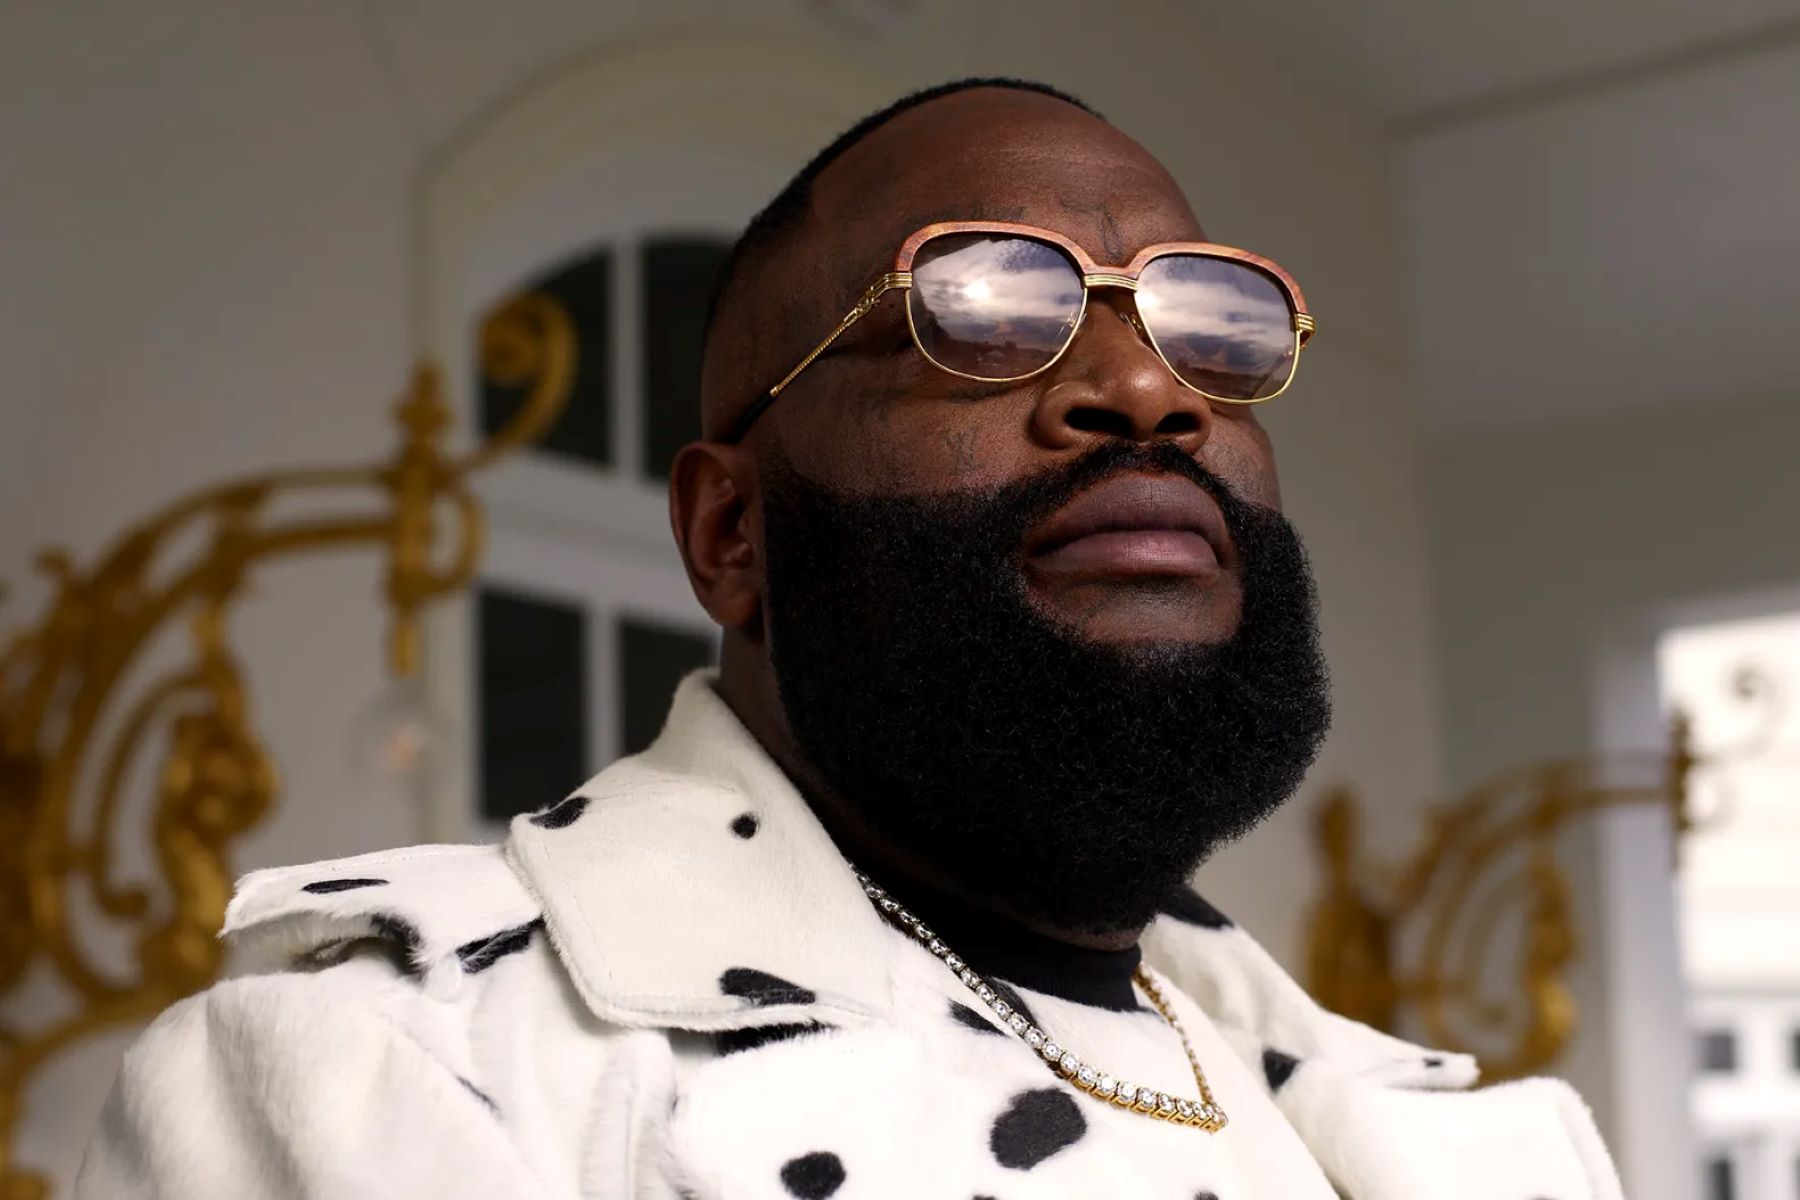 Rick Ross Signed To Which Record Label